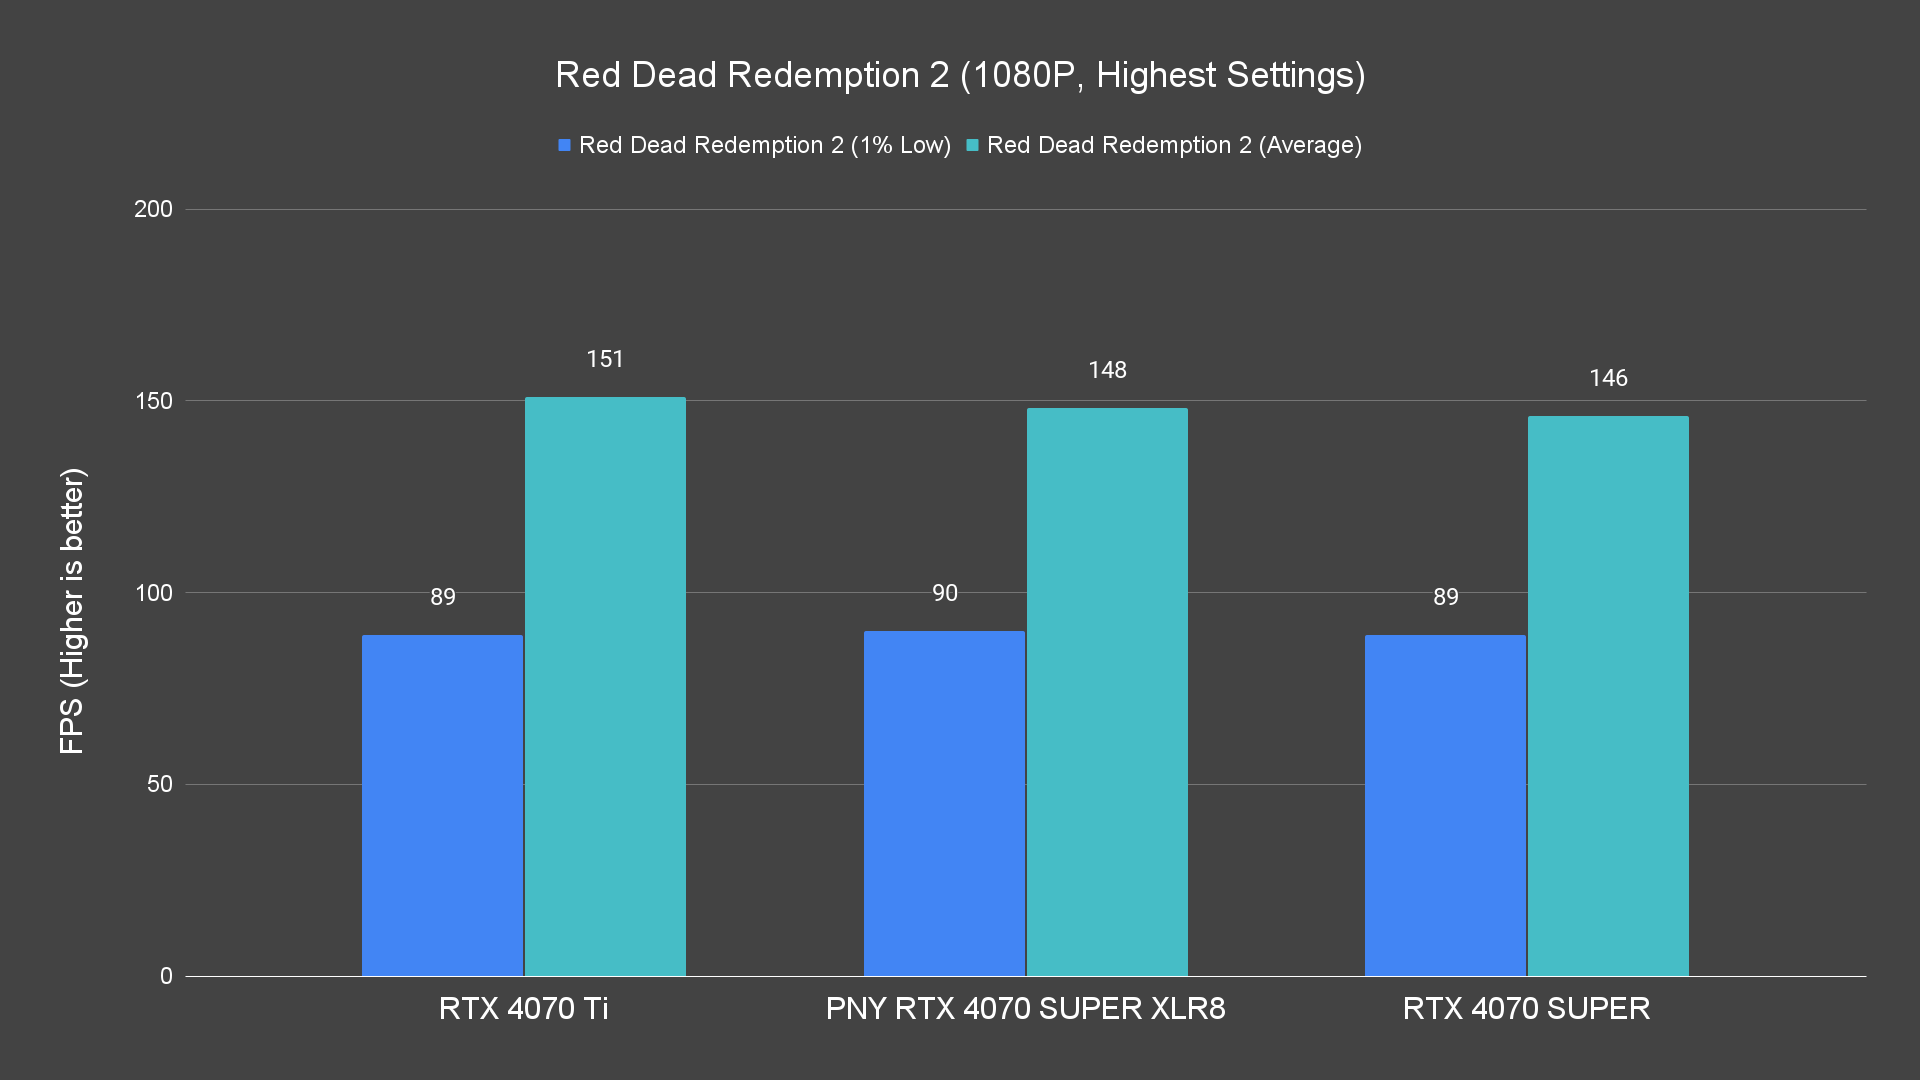 Red Dead Redemption 2 (1080P, Highest Settings) Raster PNY RTX 4070 SUPER XLR8